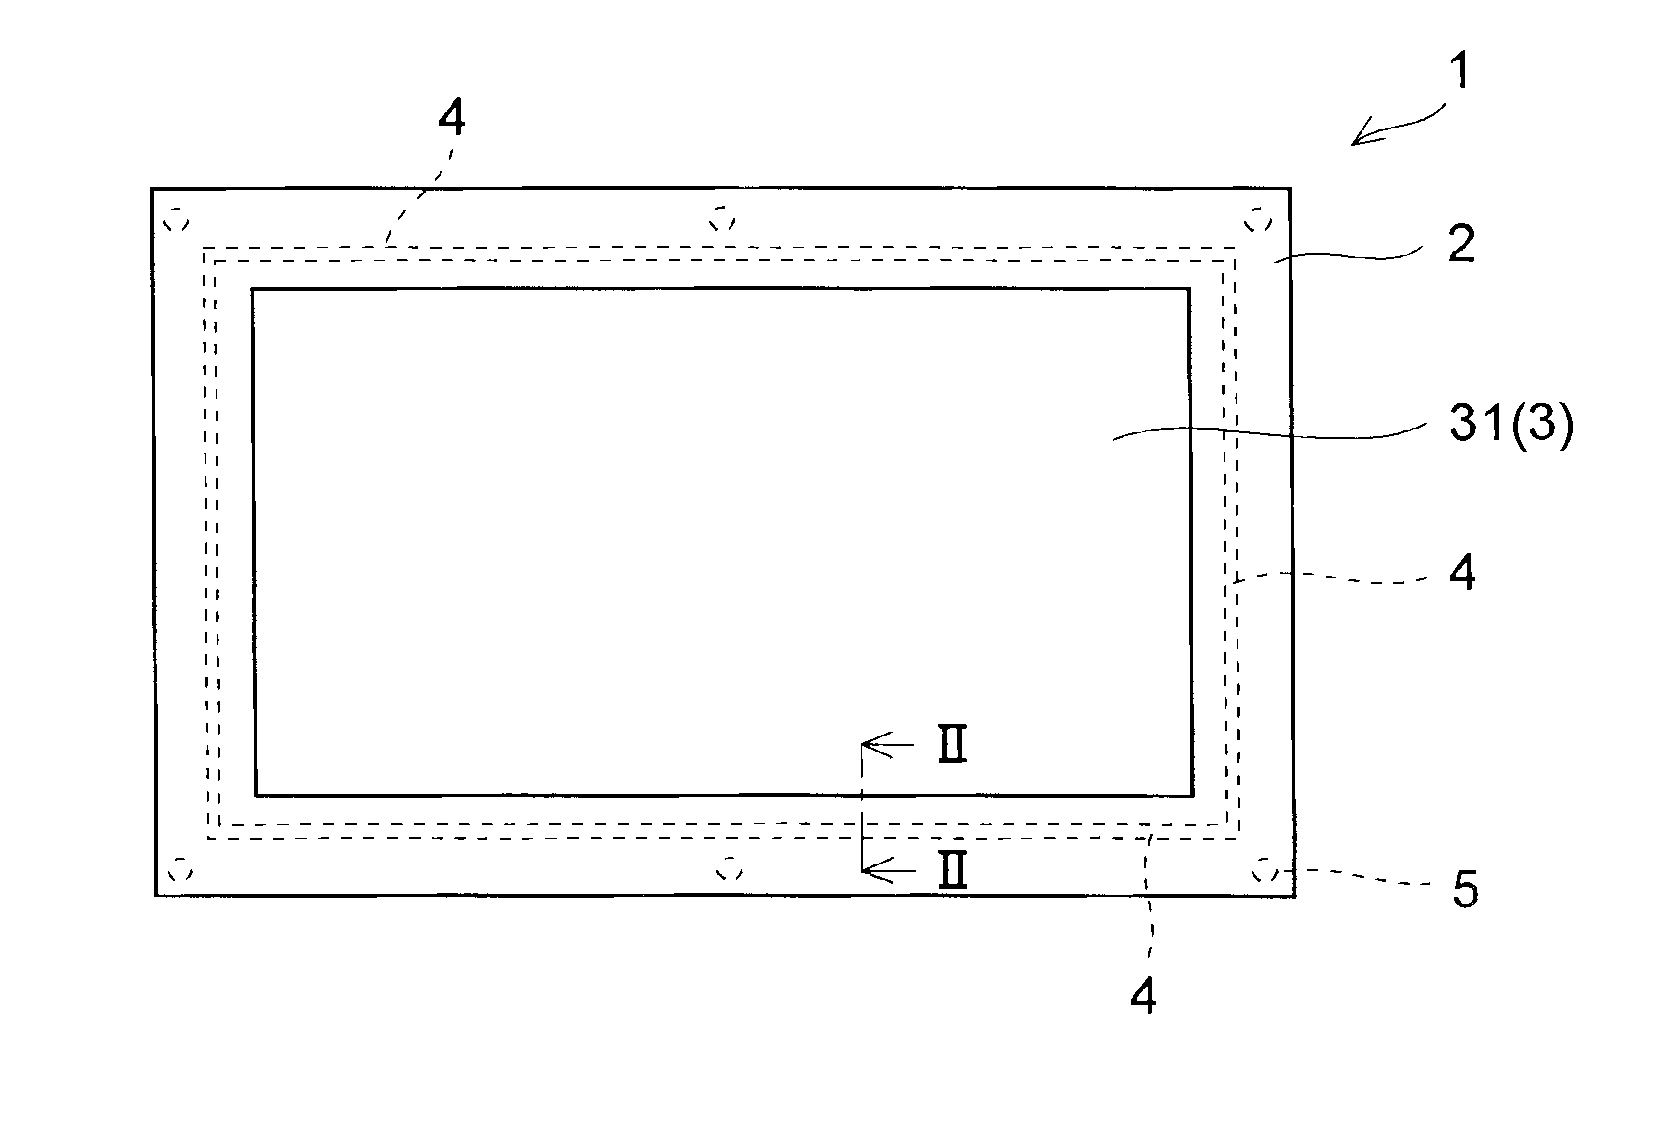 Cabinet structure for display apparatus